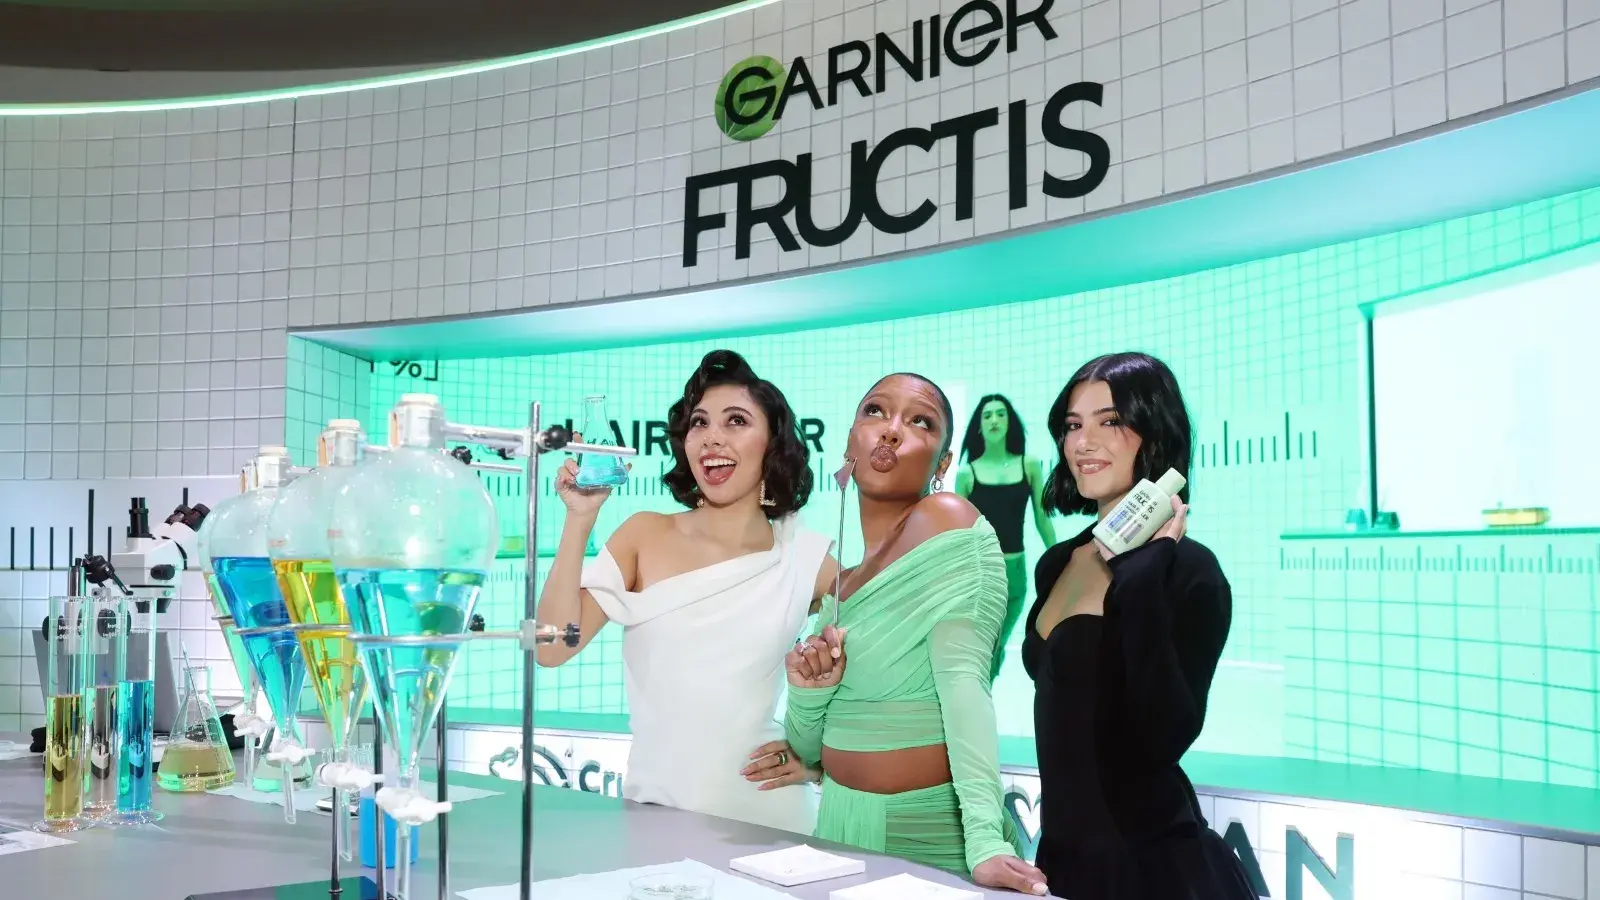 Three women posing with garnier fructis products at a promotional event with a stylized laboratory setup in the background.